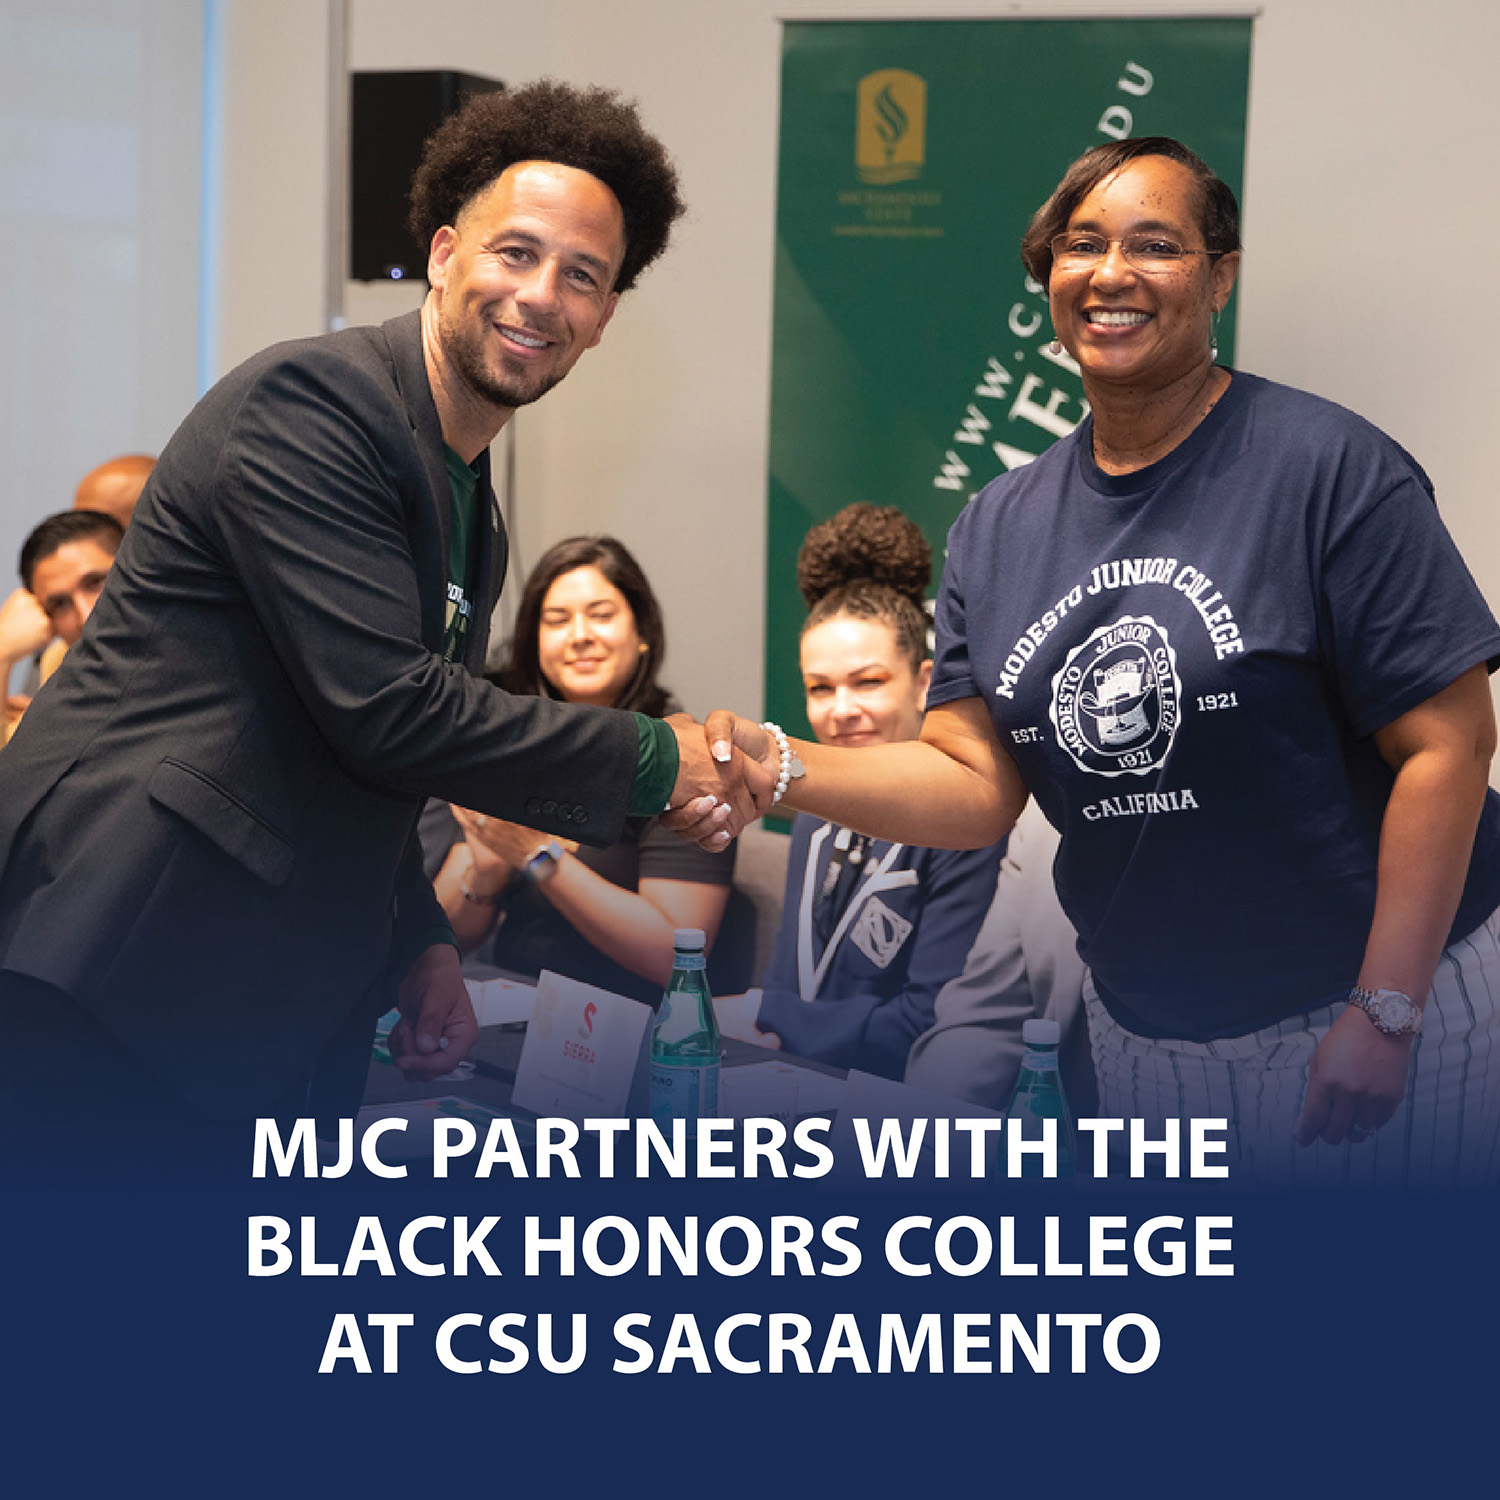 MJC partners with Black Honors College at CSU Sacramento